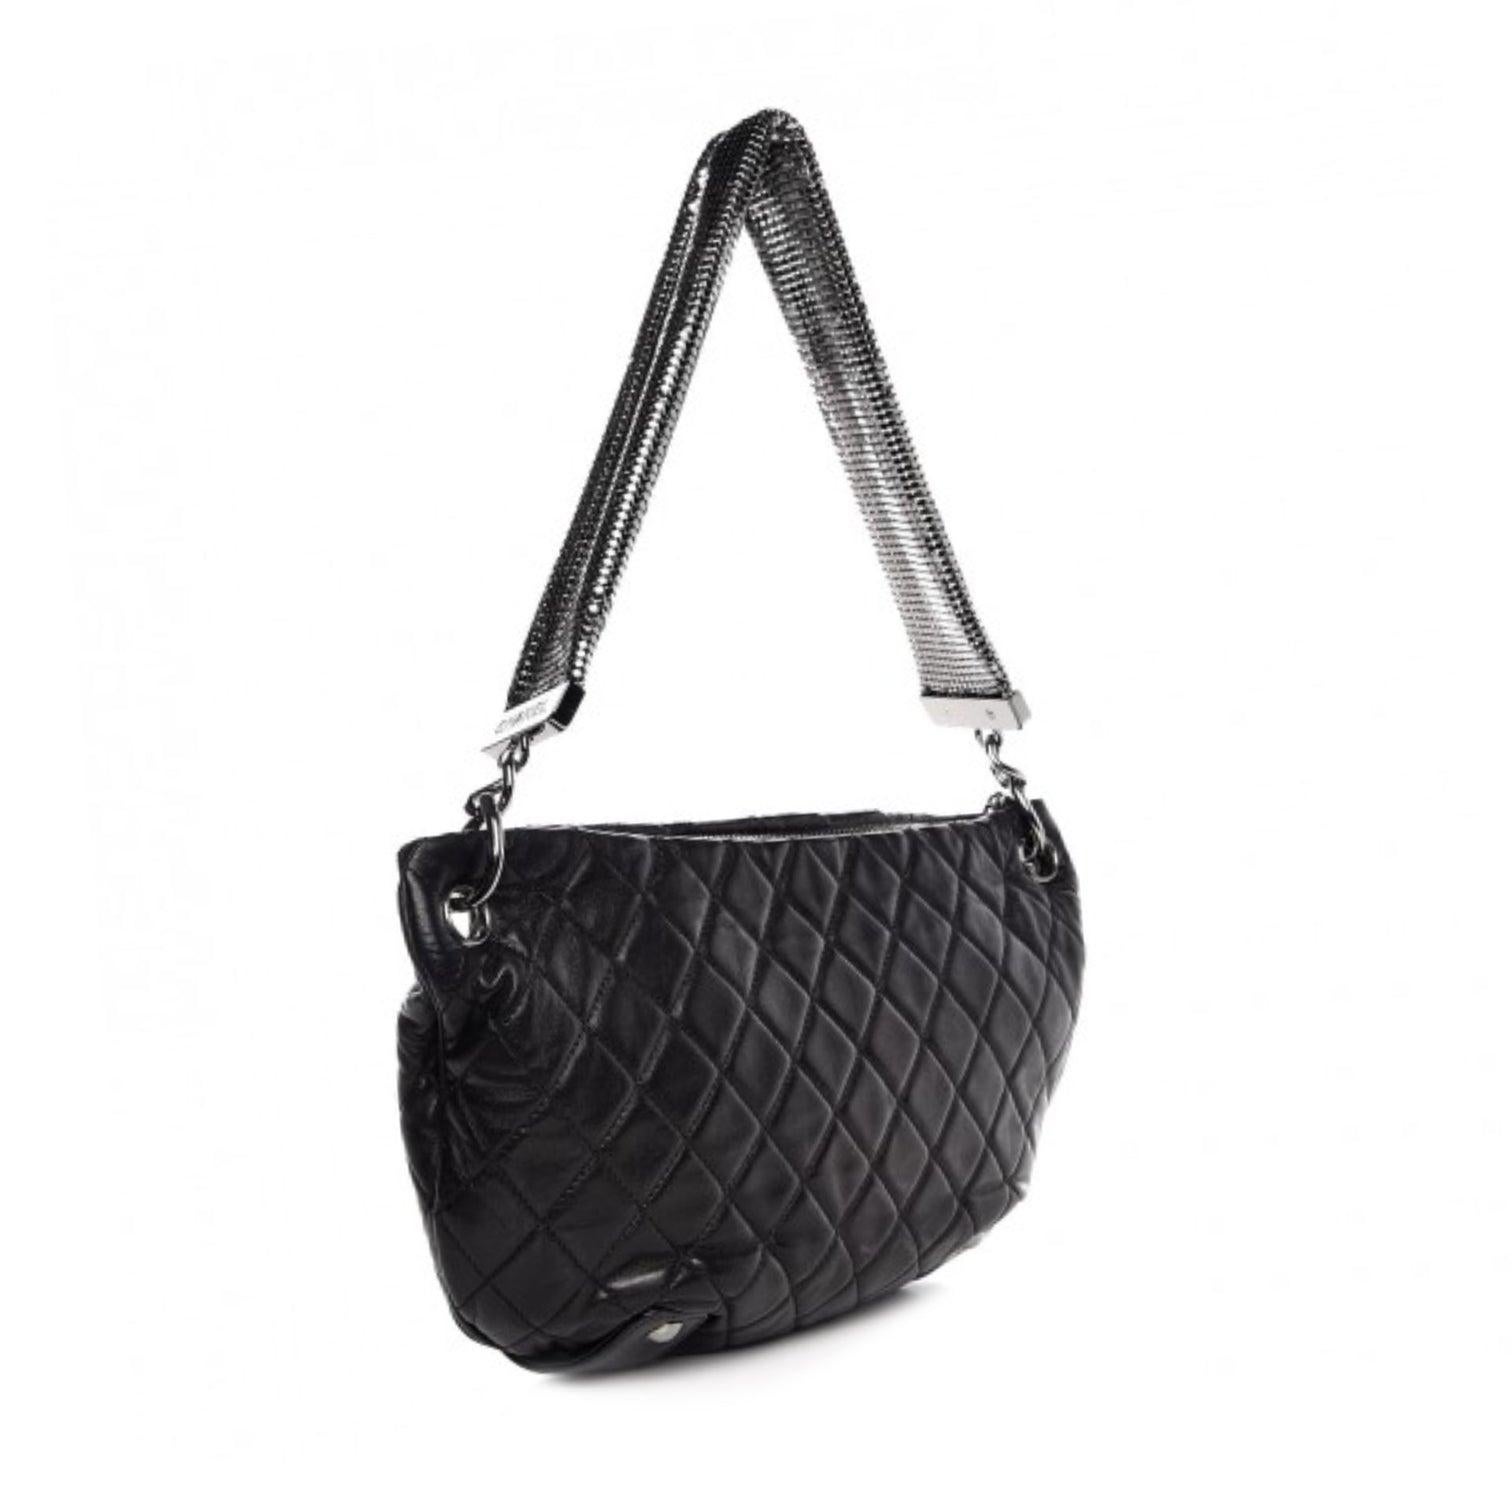 Black Chanel 2008 Rare Metallic Mesh Quilted Soft Quilted Lambskin Small Hobo Bag  For Sale